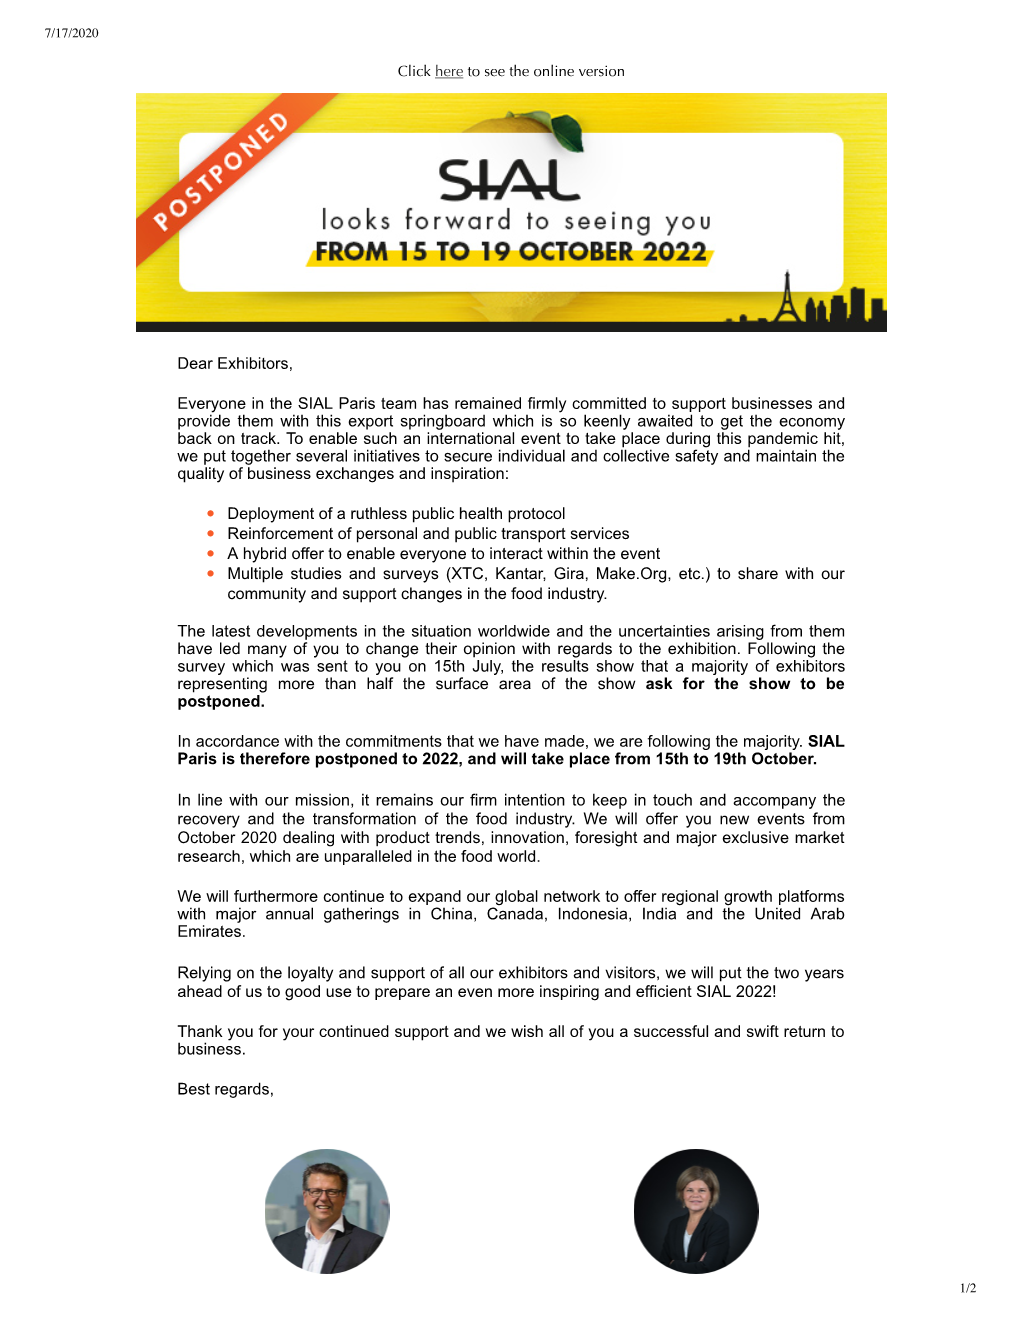 Dear Exhibitors, Everyone in the SIAL Paris Team Has Remained Firmly